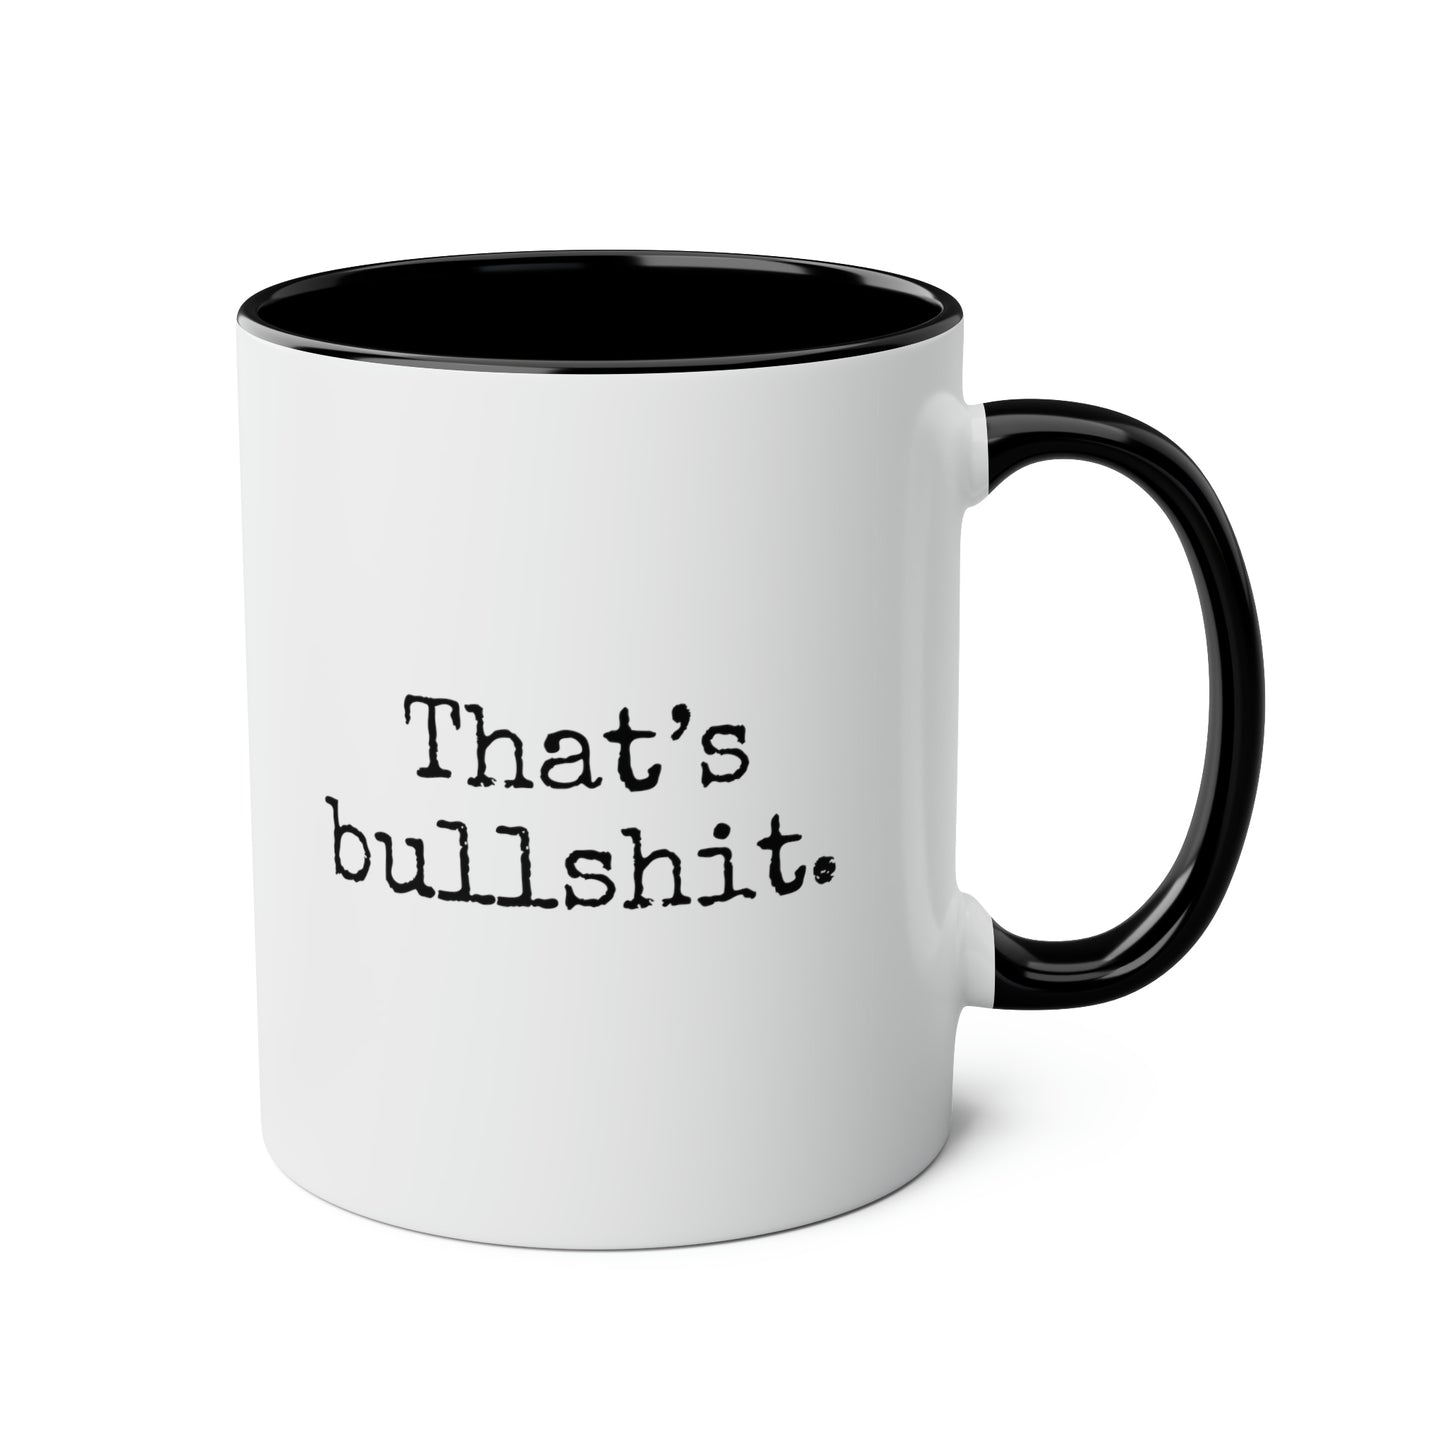 Thats Bullshit 11oz white with black accent funny large coffee mug gift for secret santa colleague coworker mate curse rude humor waveywares wavey wares wavywares wavy wares